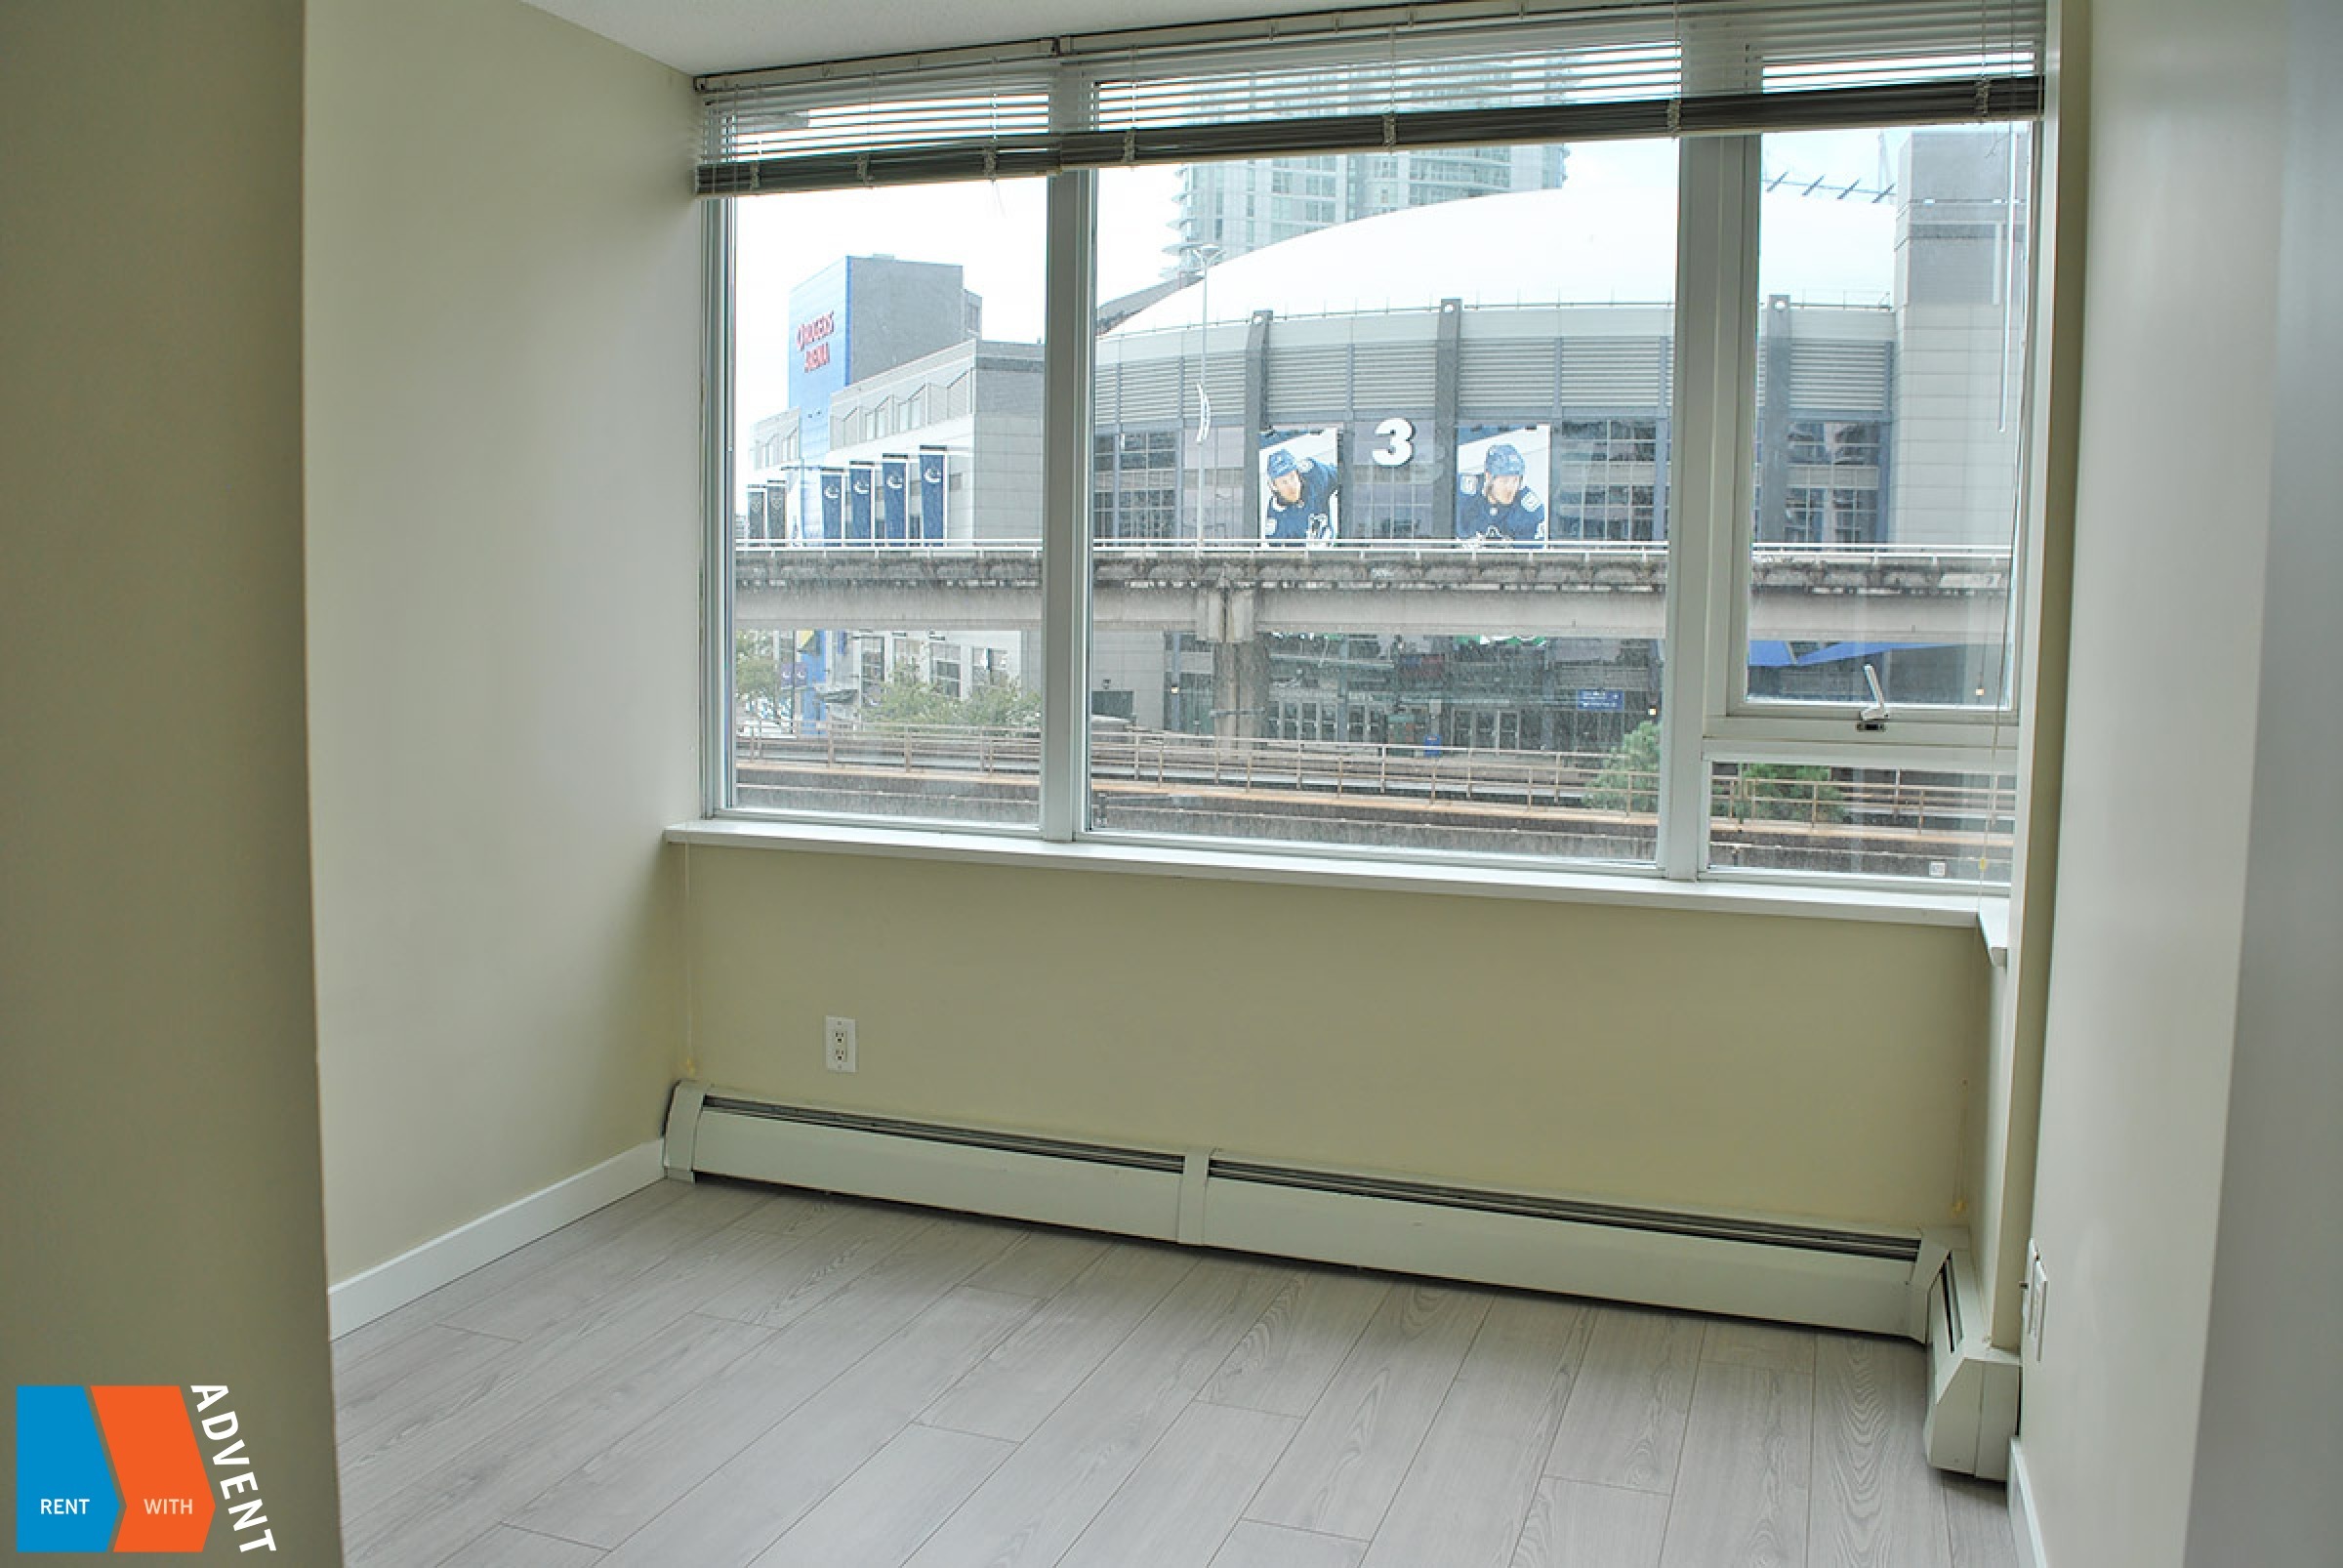 5th Floor Unfurnished 1 Bedroom & Flex Apartment For Rent at Firenze in Downtown Vancouver. 503 - 688 Abbott Street, Vancouver, BC, Canada.